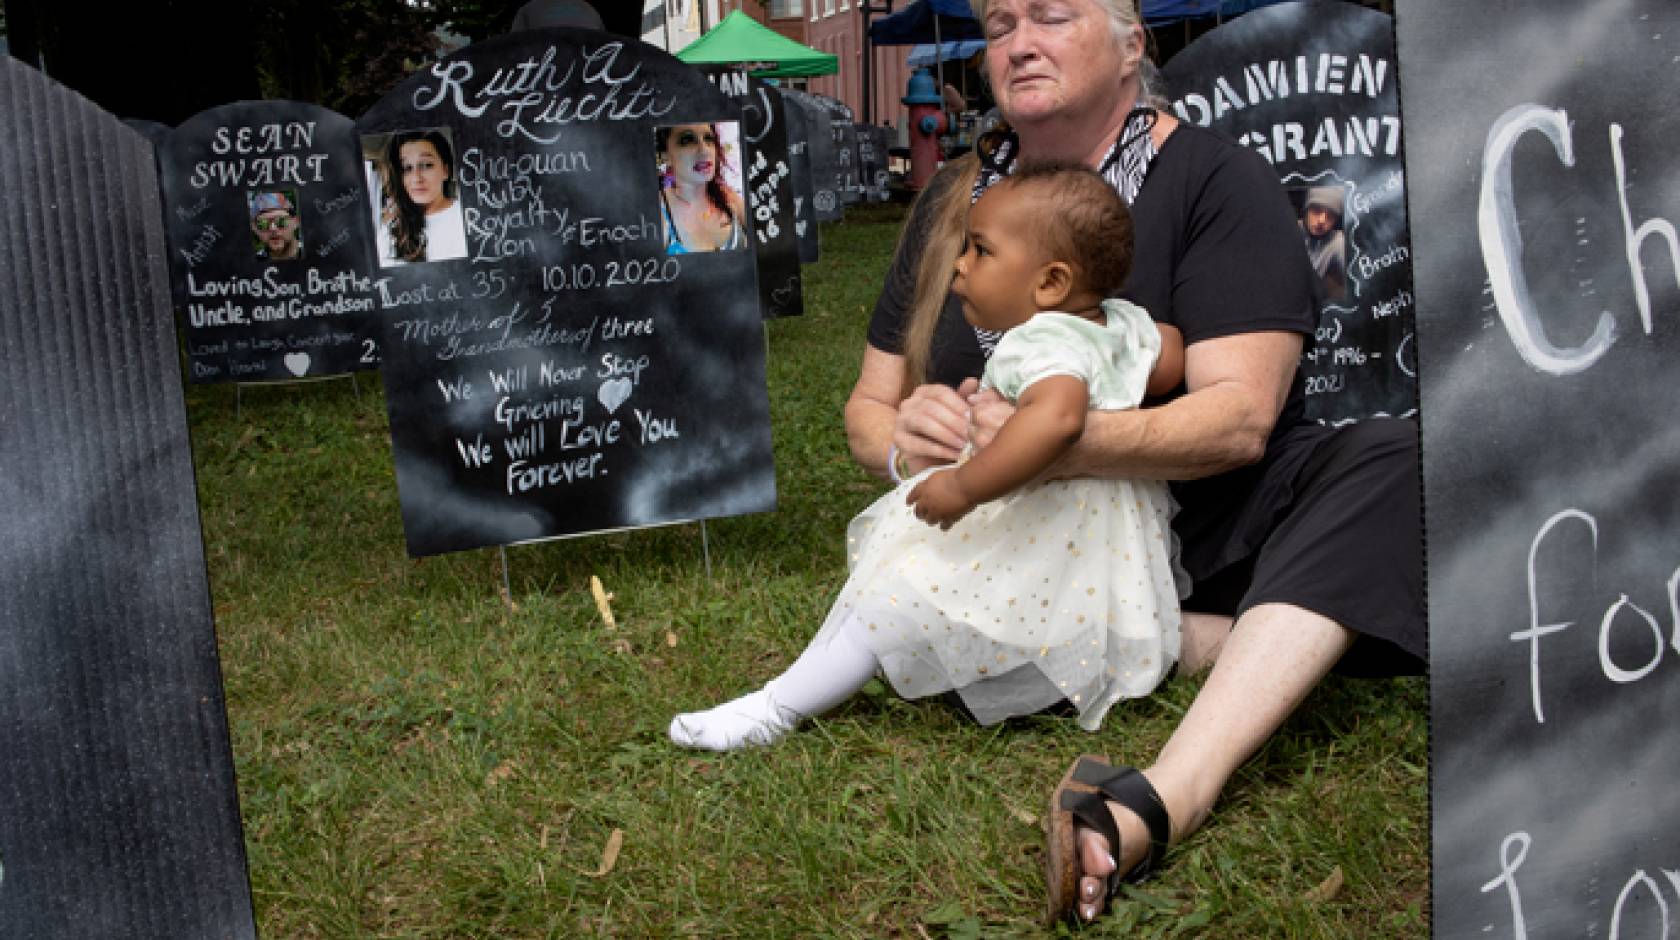 A woman holds a young child near an opiate memorial